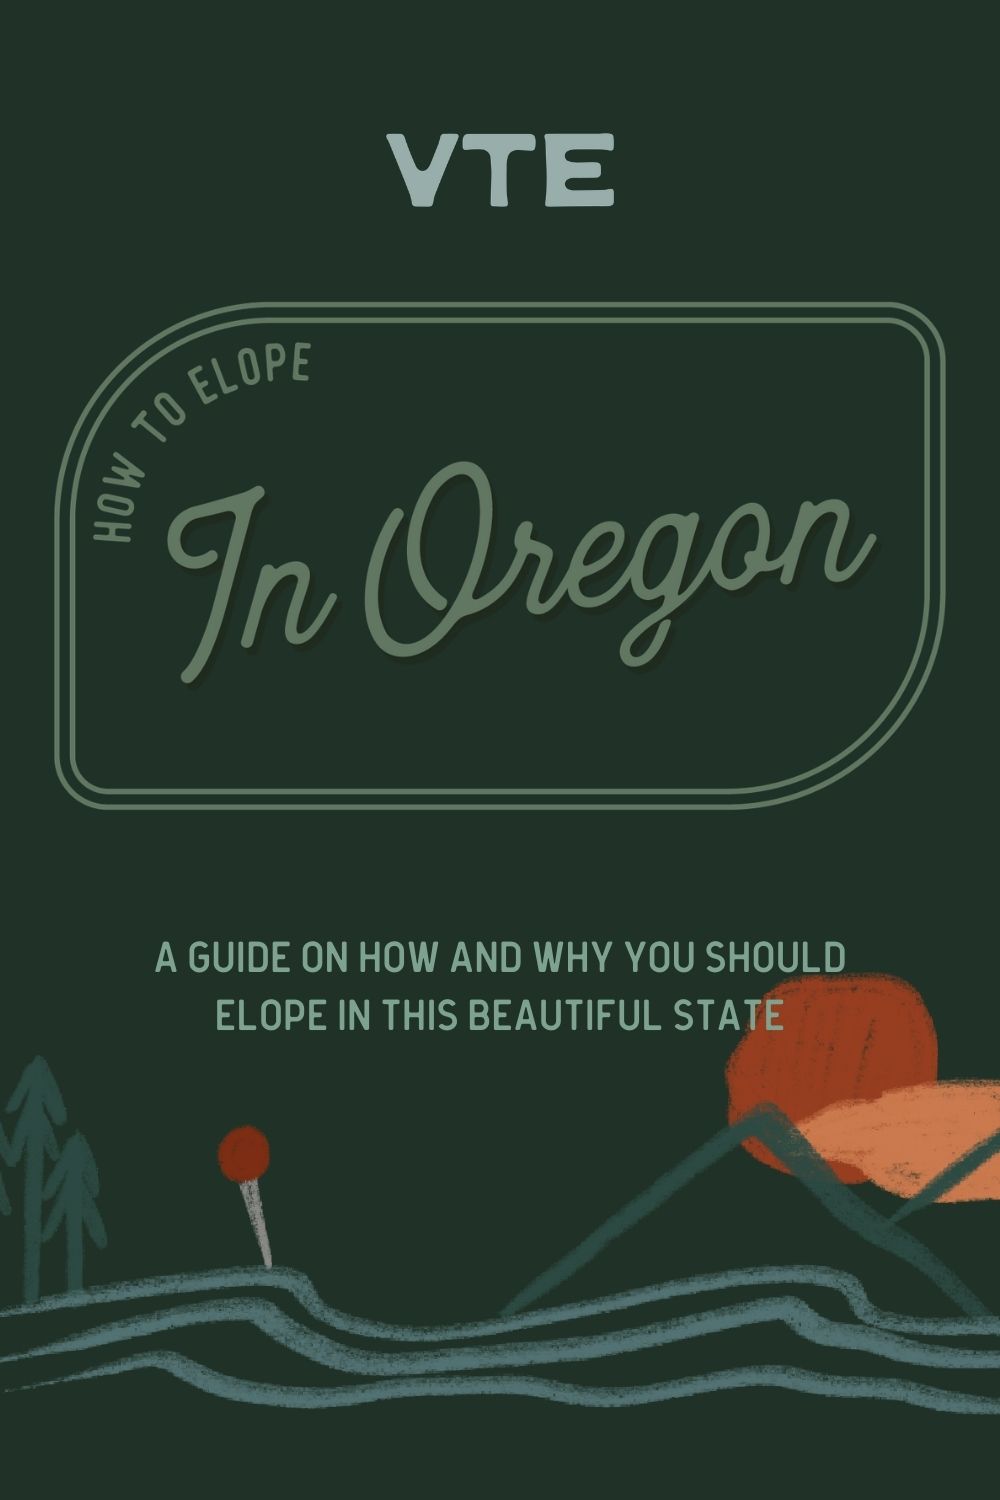 Blog on how to elope in Oregon state